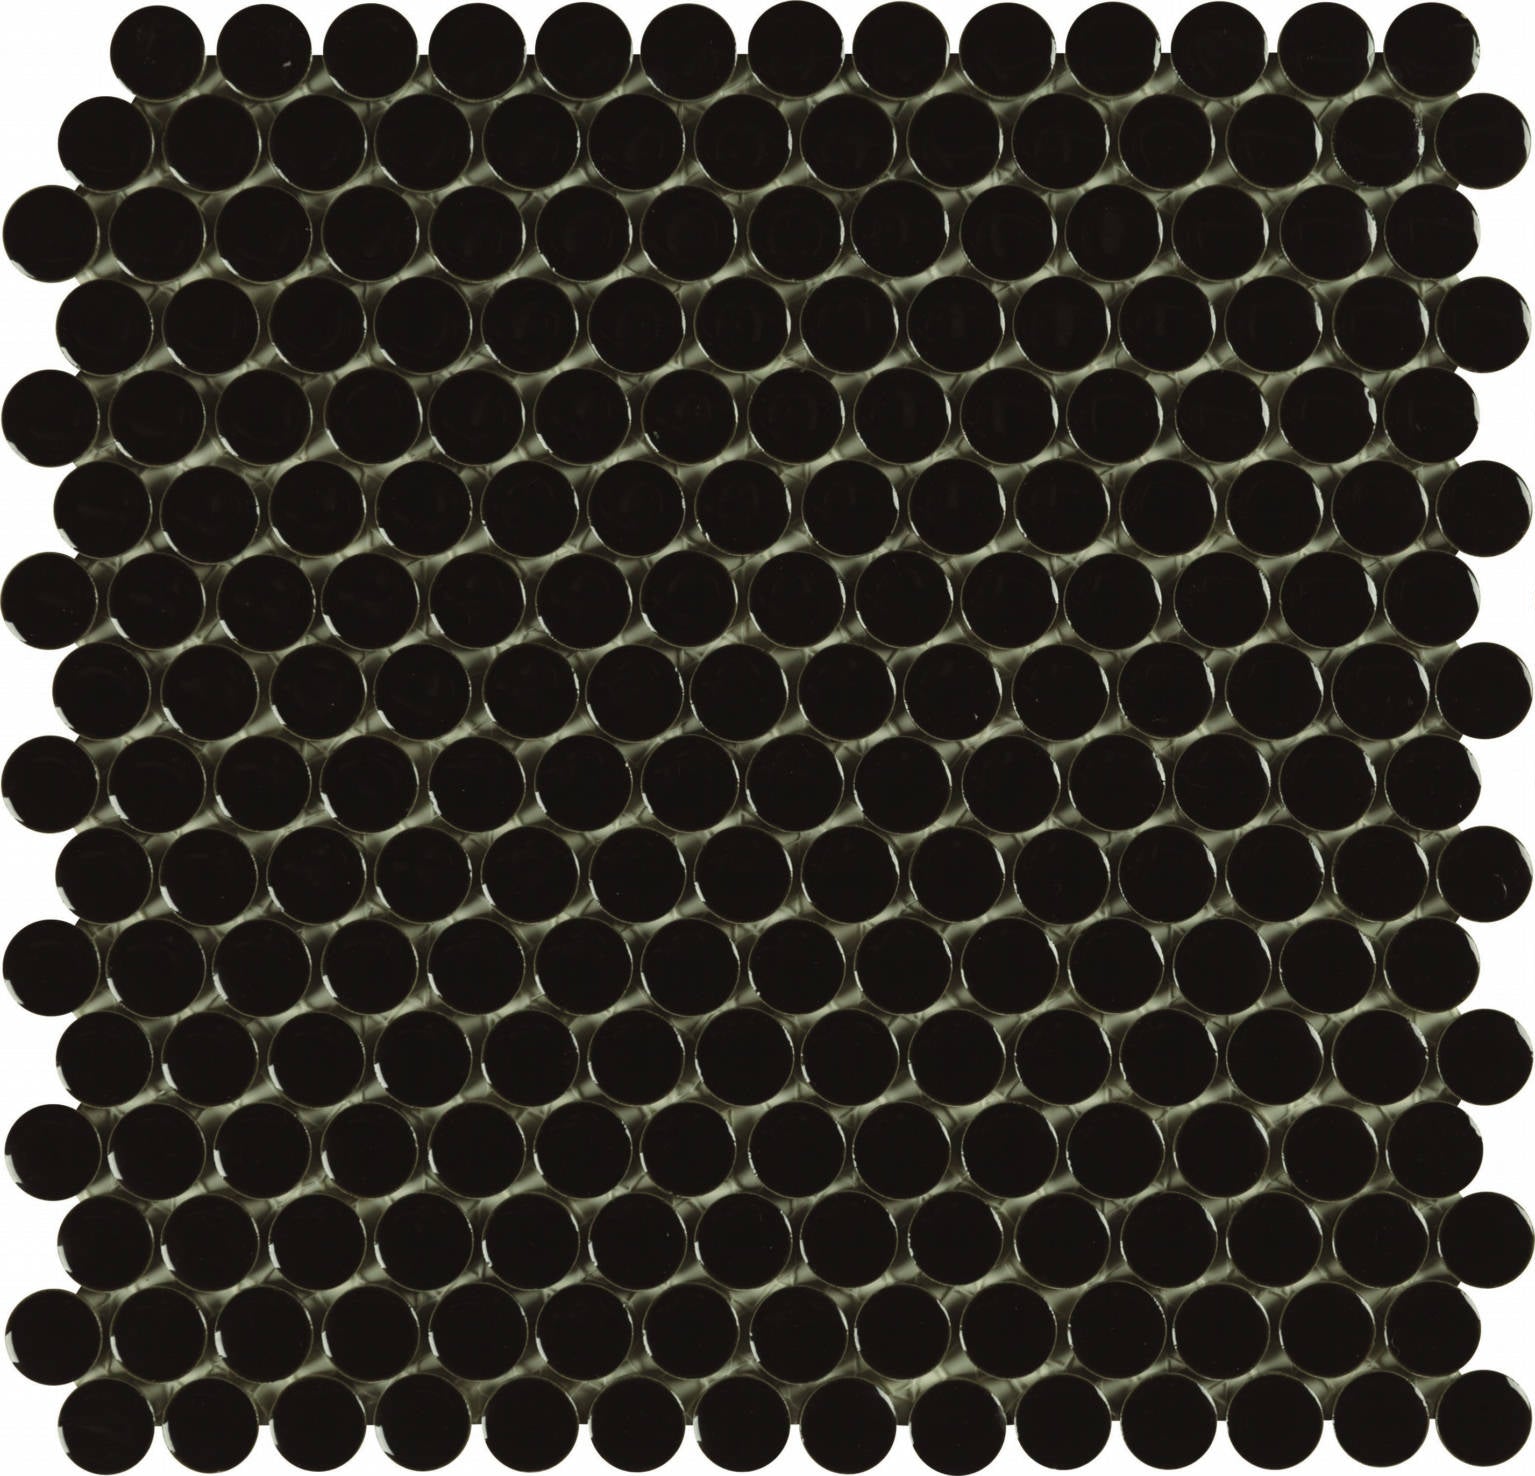 Mosaic Black 1-Inch Penny Rounds Pattern (12"x12")